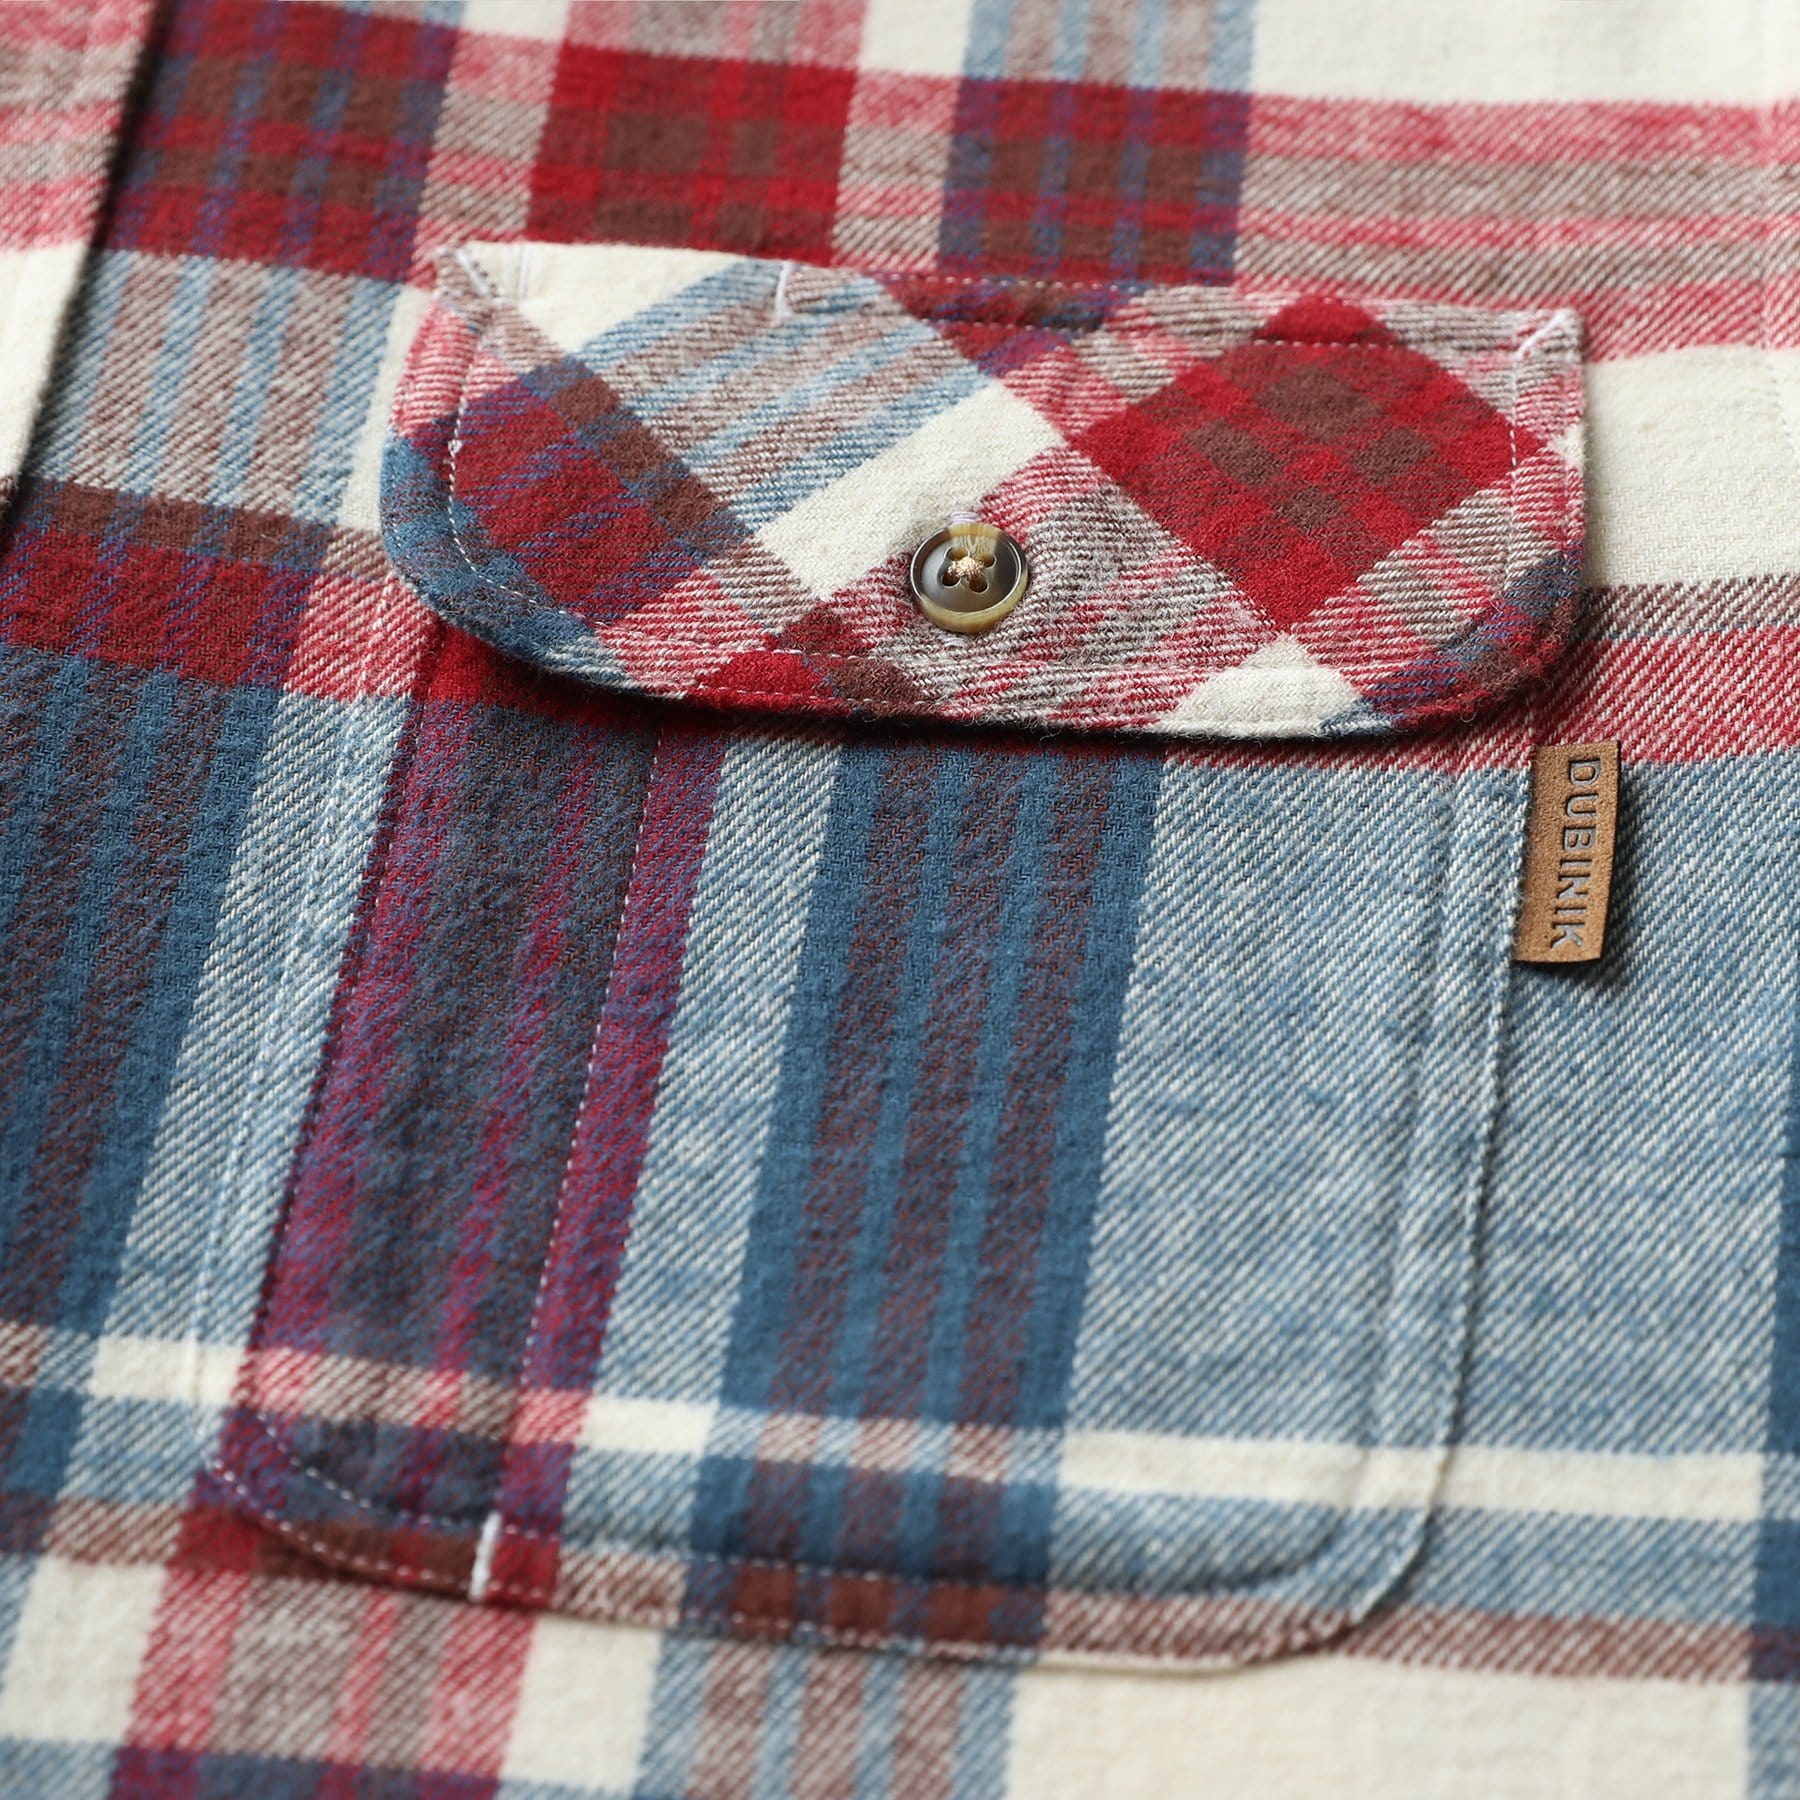 Mens Flannel Shirts Long Sleeve Casual #1012